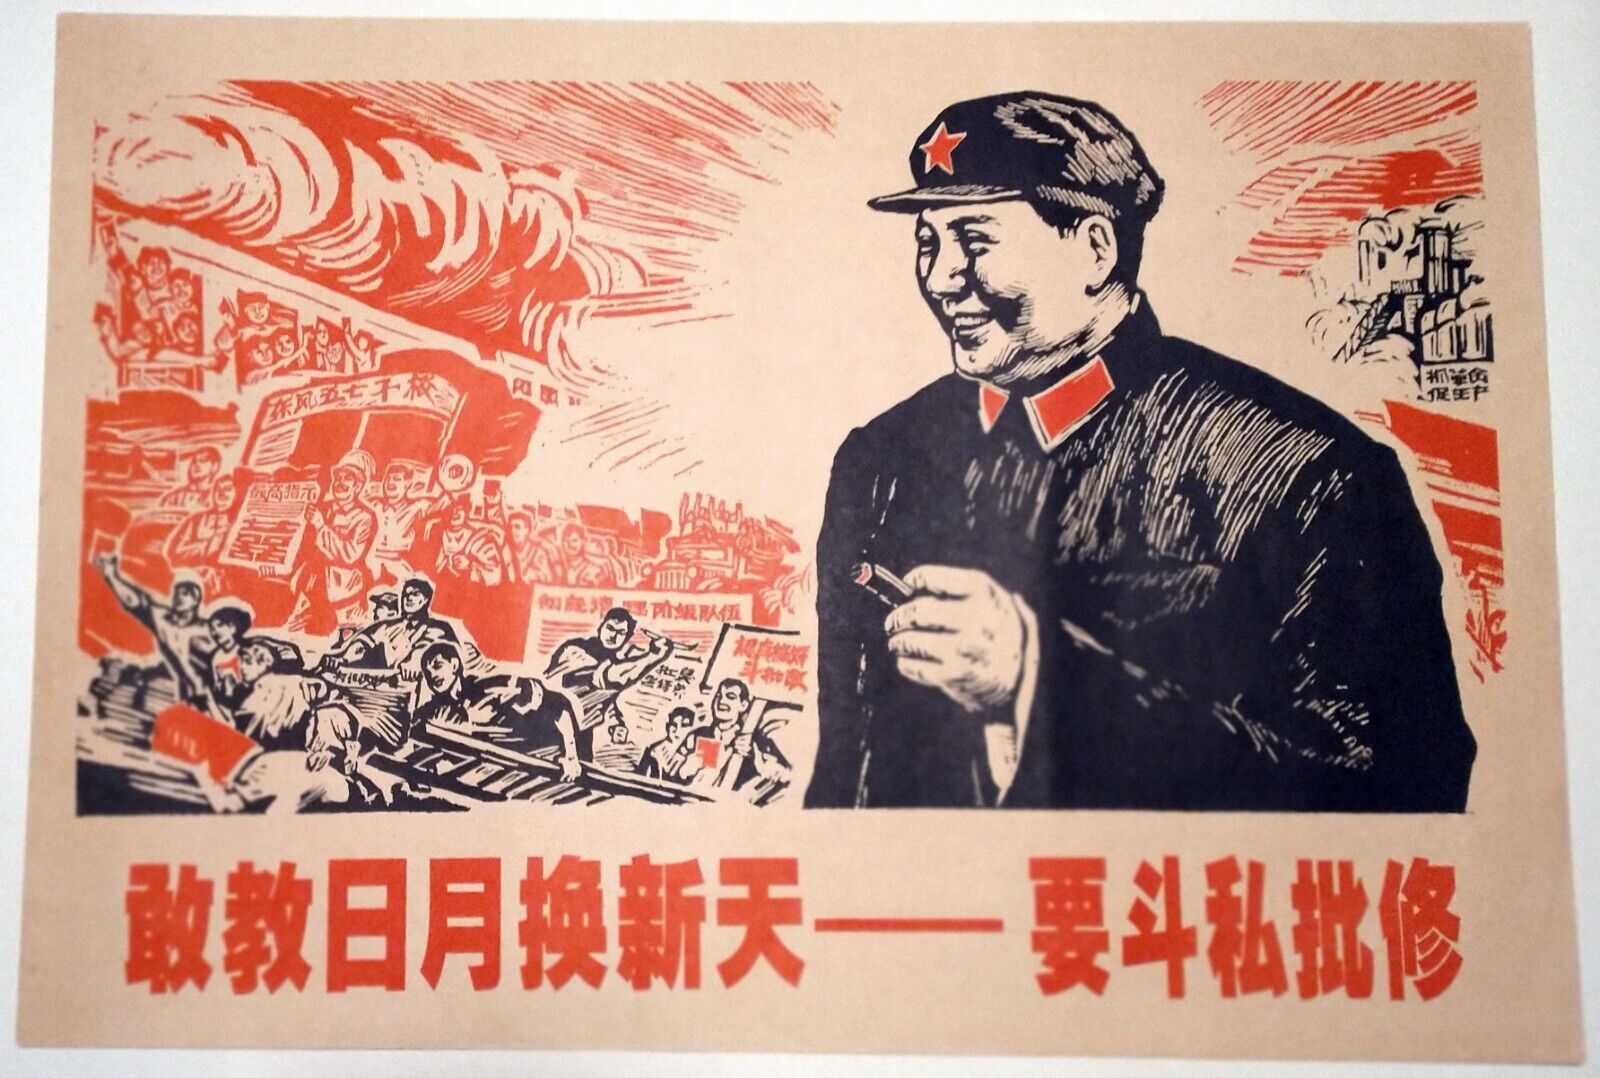 CHINESE CULTURAL REVOLUTION POSTER 60's VINTAGE - US SELLER - Mao with Cigarette